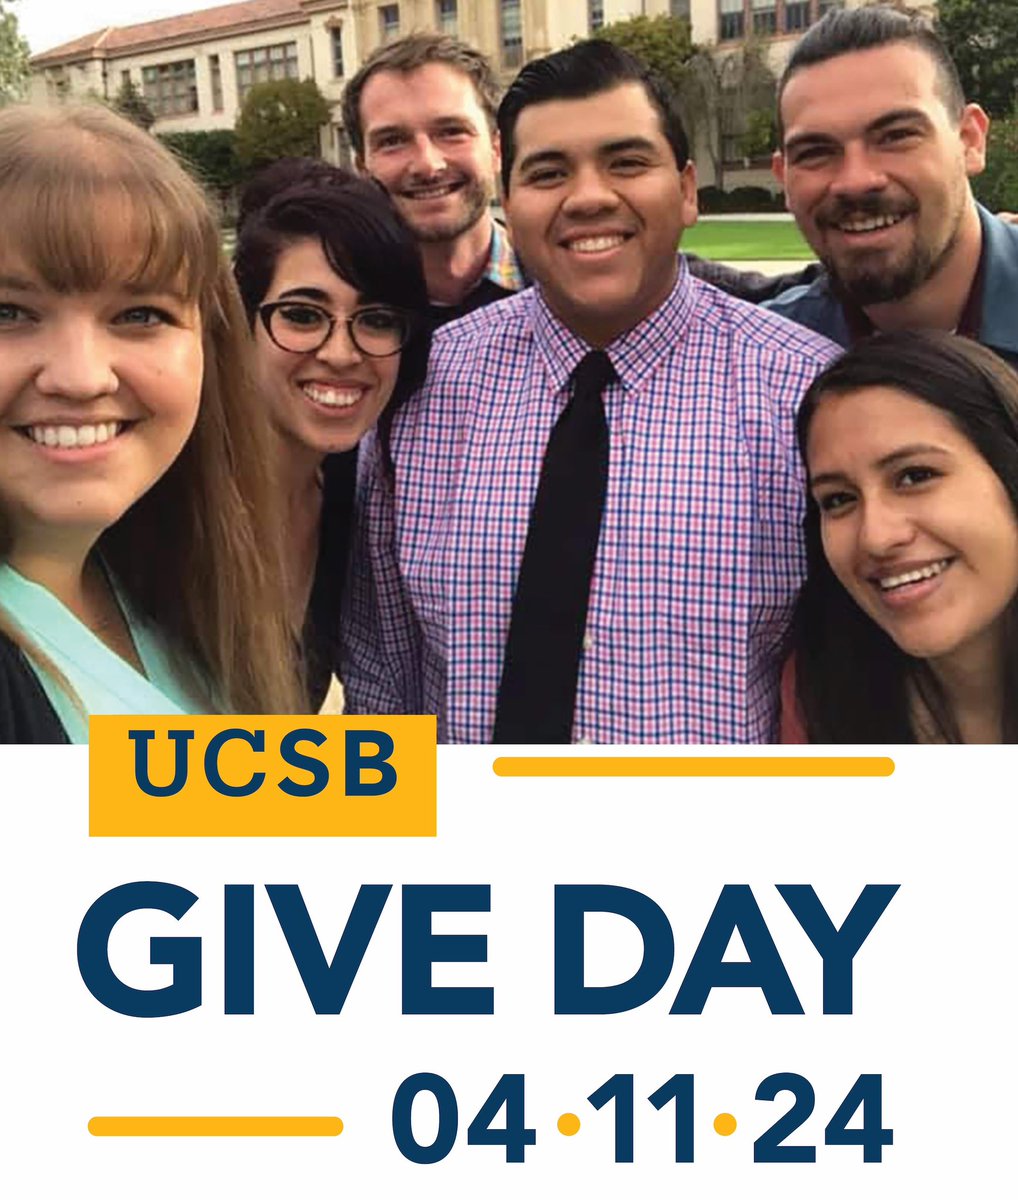 A generous education alum from '93 has challenged us to reach 25 gifts to @TEPatUCSB on#UCSBGiveDay to unlock $7,000 in fellowship support for promising teacher candidates. Challenge accepted! Will you help us reach our goal? ucsb.scalefunder.com/gday/giving-da…